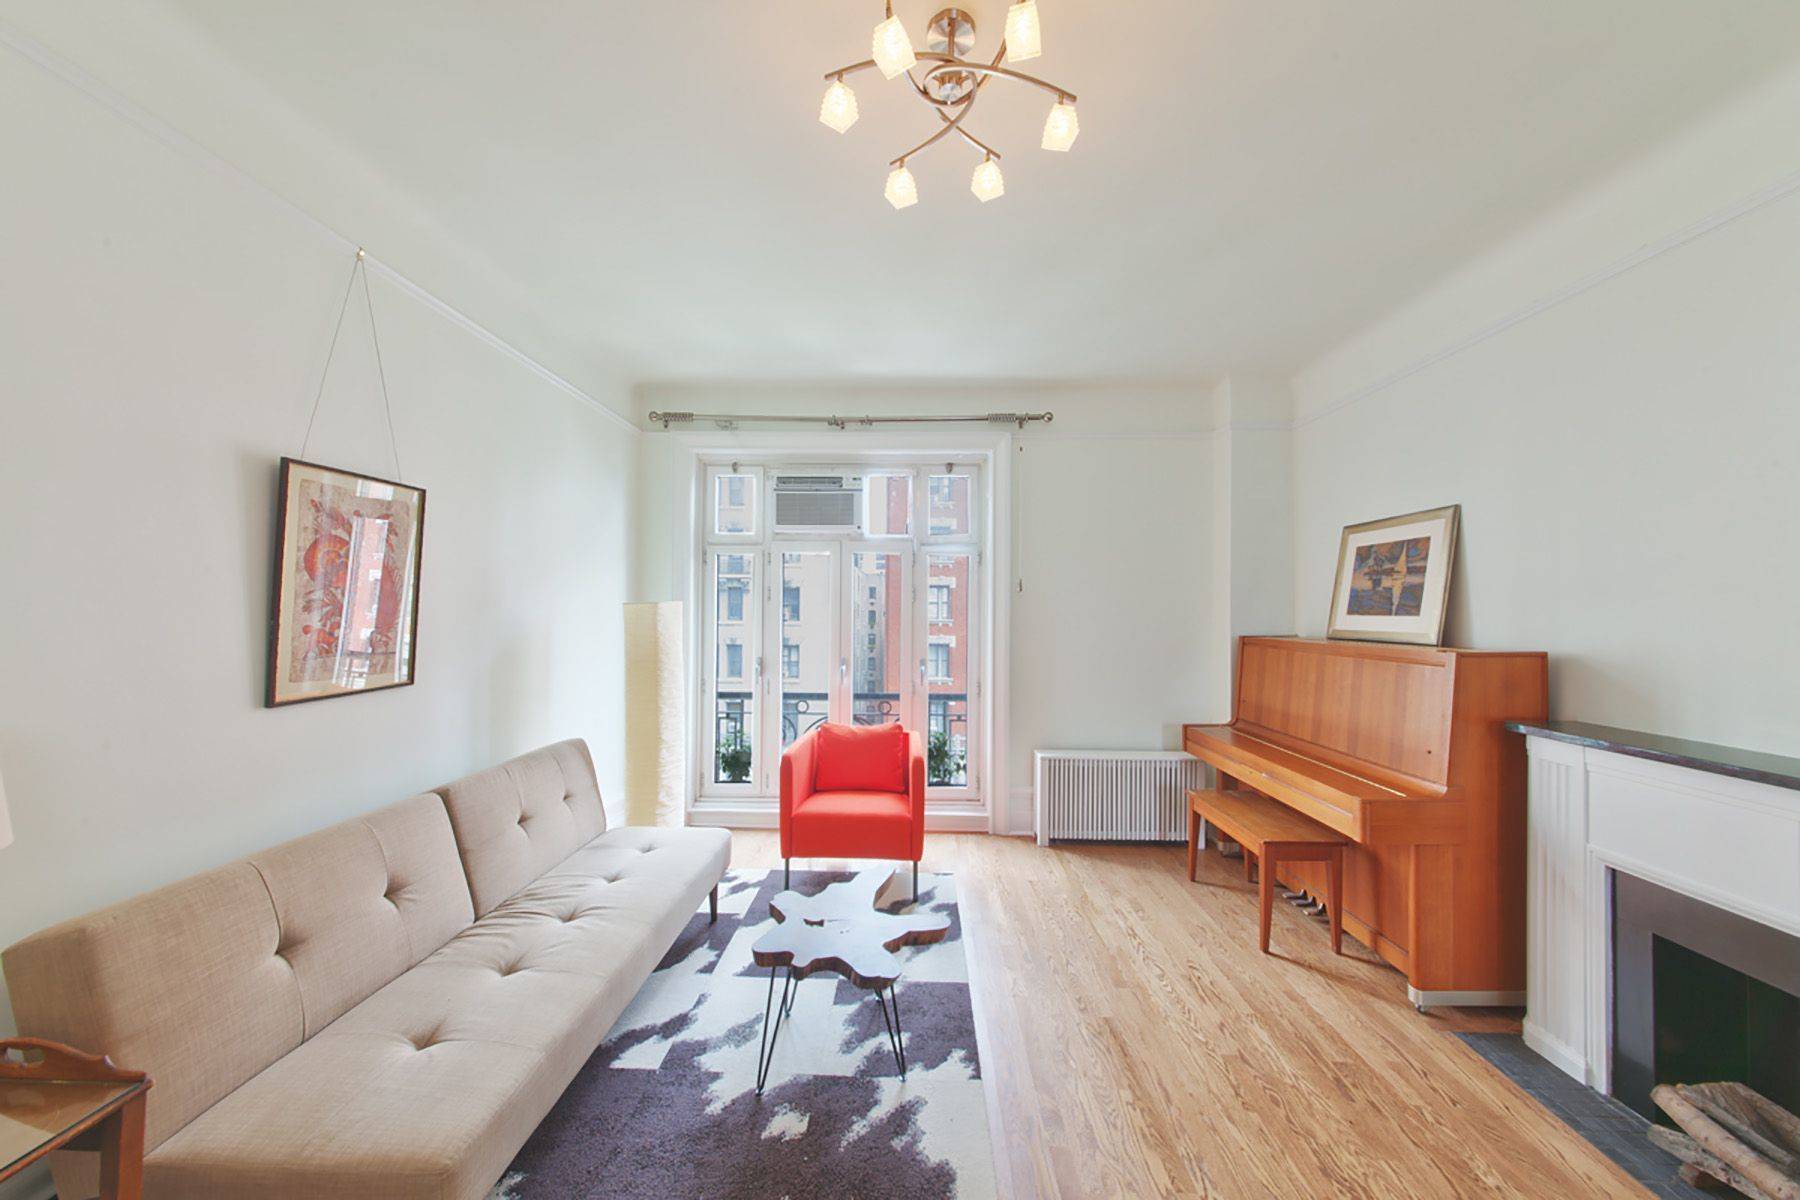 Available Now a Offered as either an unfurnished or furnished prewar one bedroom in The Amherst Cortlandt, a full service condominium in the vibrant Columbia University neighborhood.